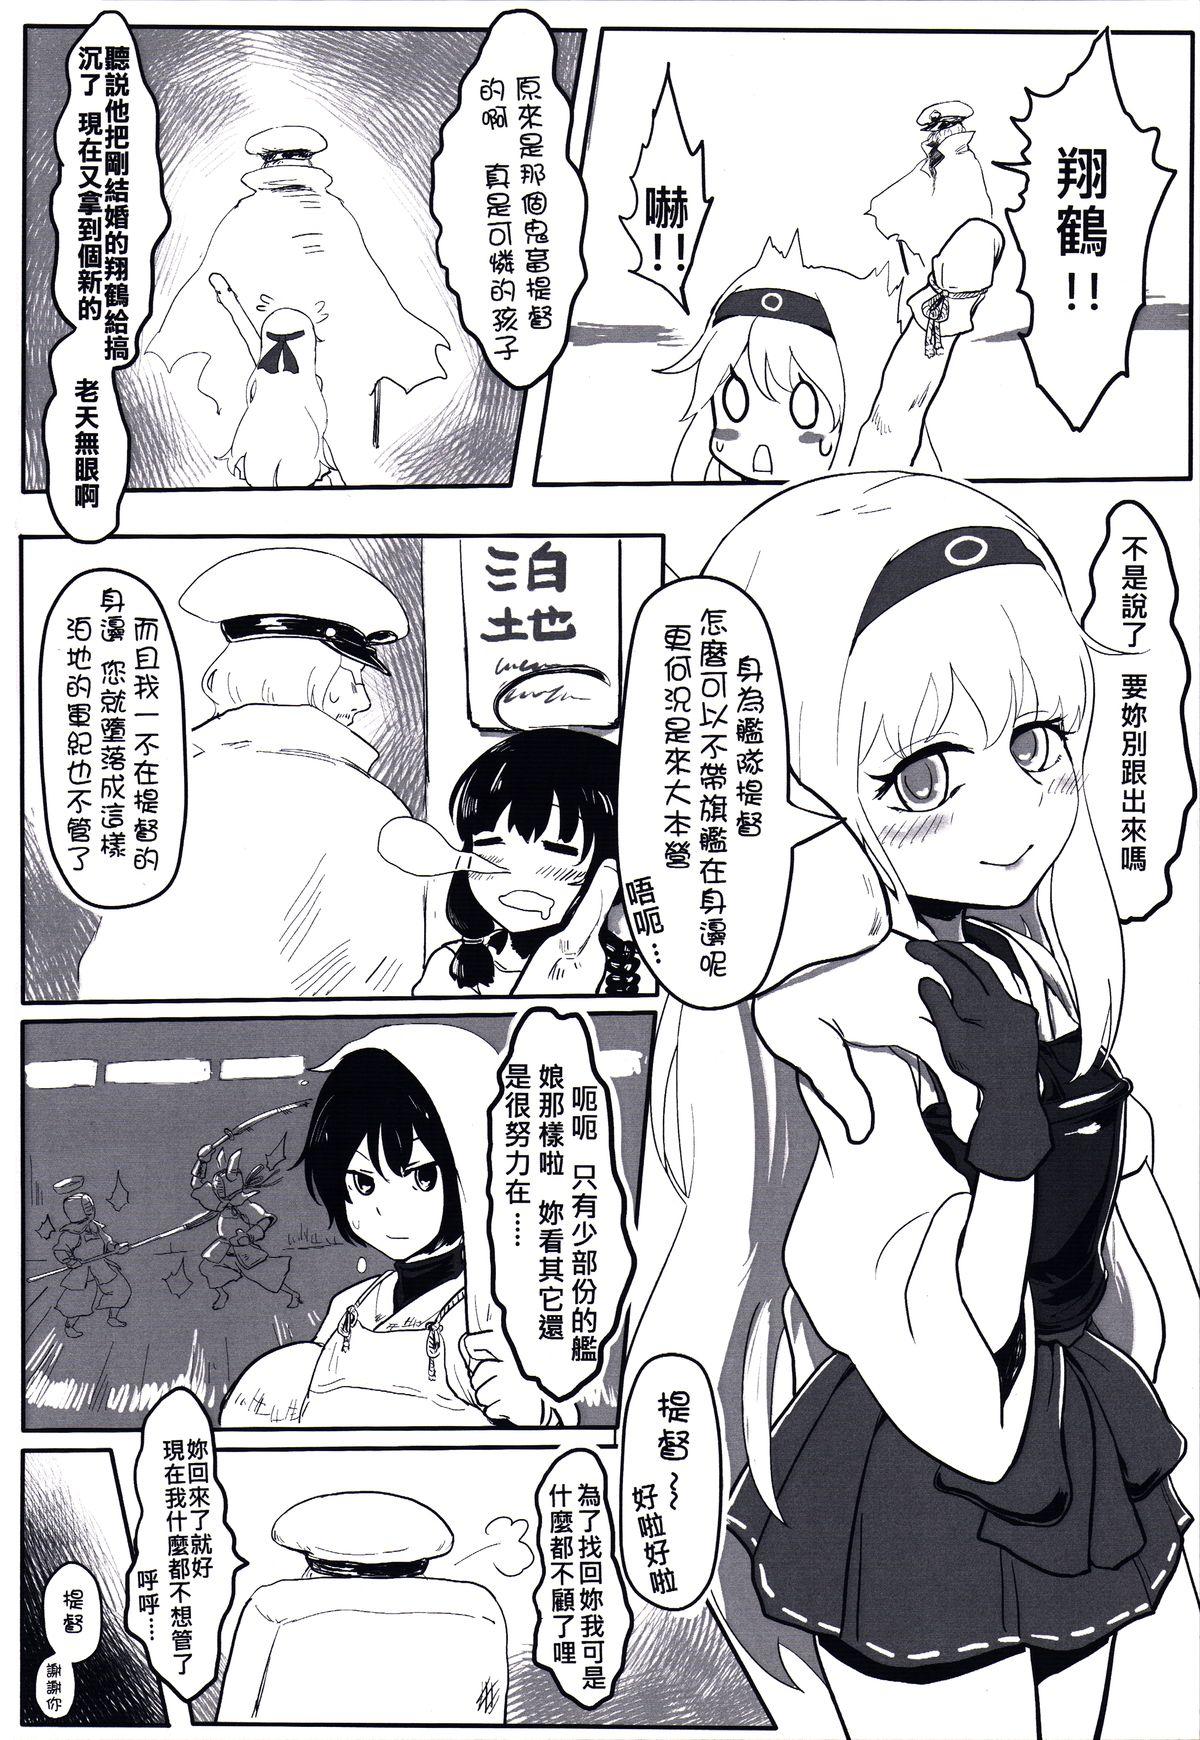 Domina (FF24) [Toadstool Factory (Mimit)] 深海(幼)妻姦 | Abyssal (Loli) Rape [Kantai Collection -KanColle-] [Chinese] - Kantai collection Retro - Page 27